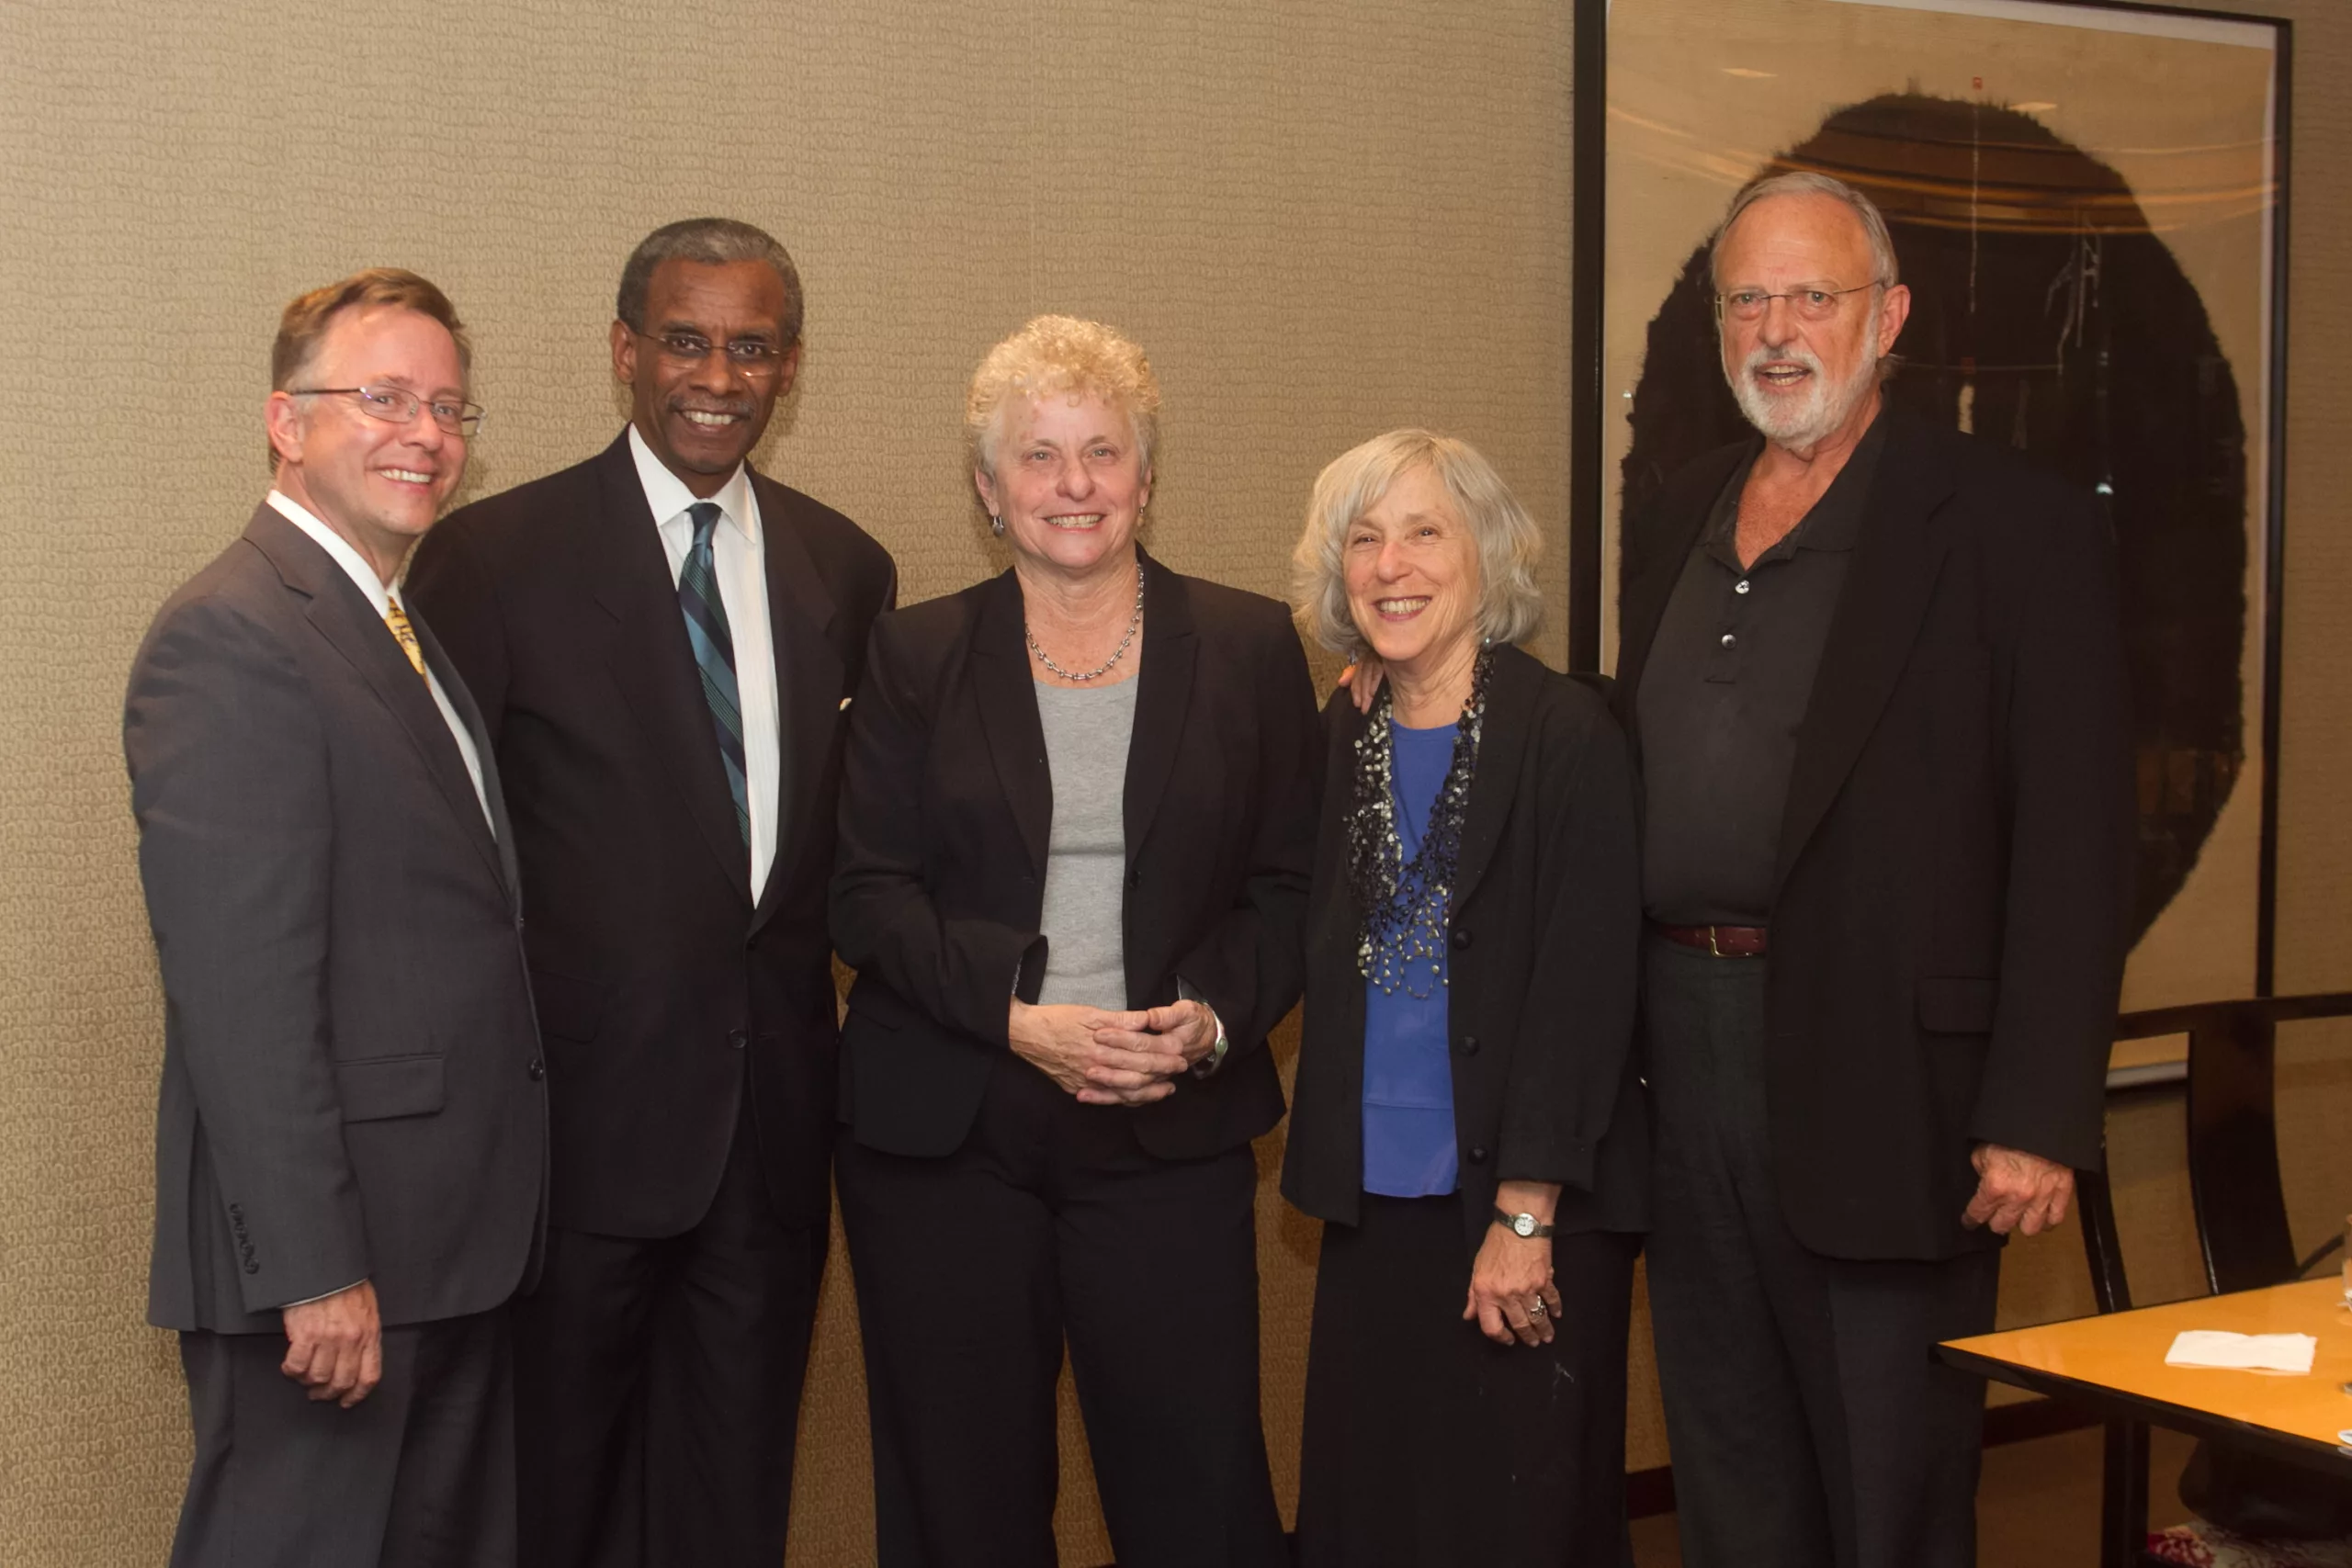 MBHP Executive Director Chris Norris with honorees George A. Russell, Kate Racer and Judith Liben, along with MBHP Board of Directors Co-Chair Steven Rioff.